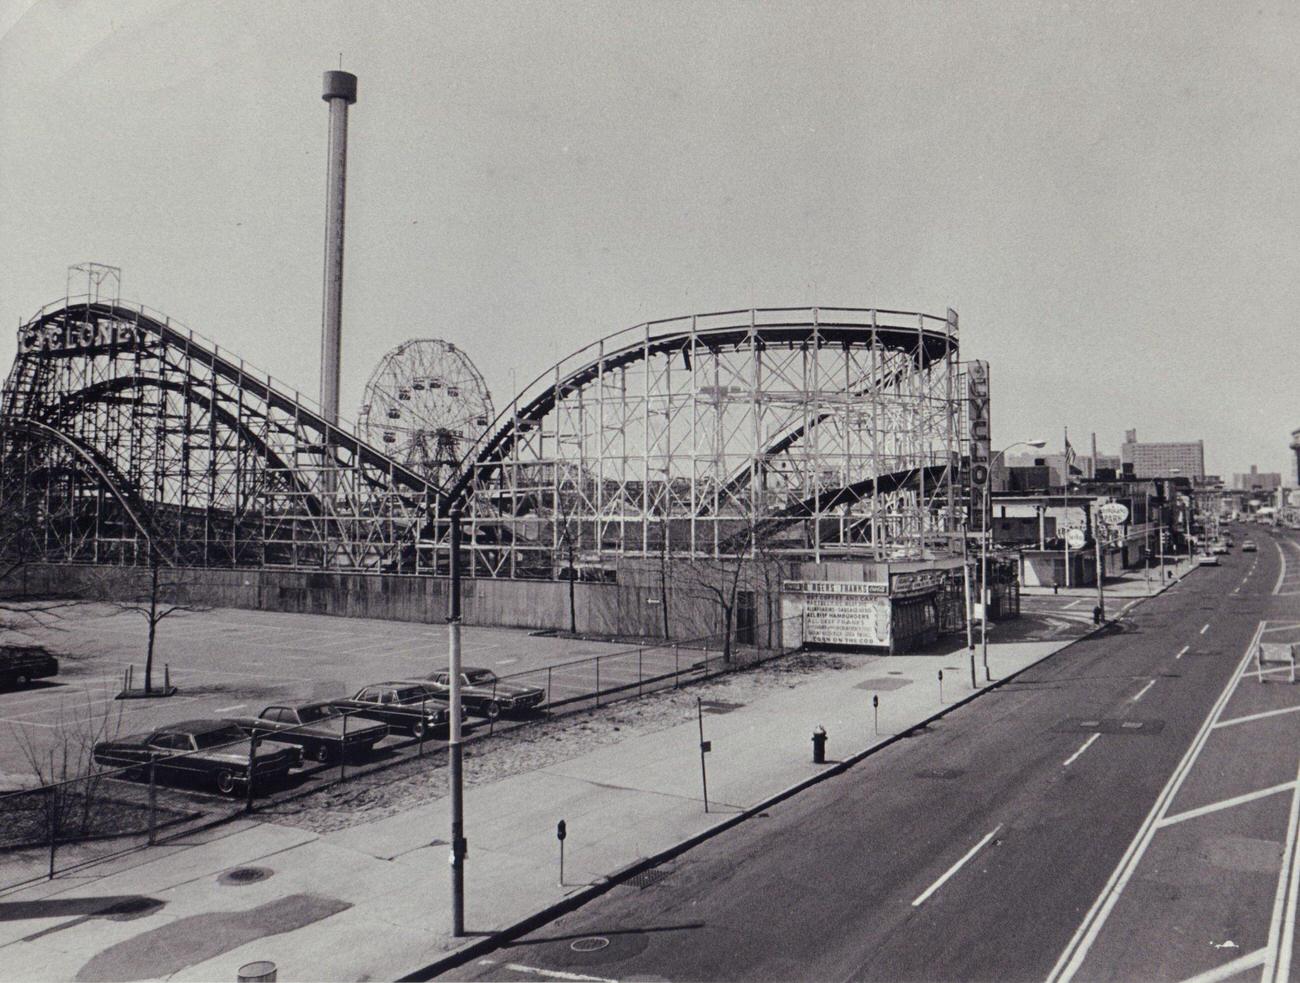 Overall View Of Surf Avenue With Cyclone And Wonder Wheel In The Background, April 1975